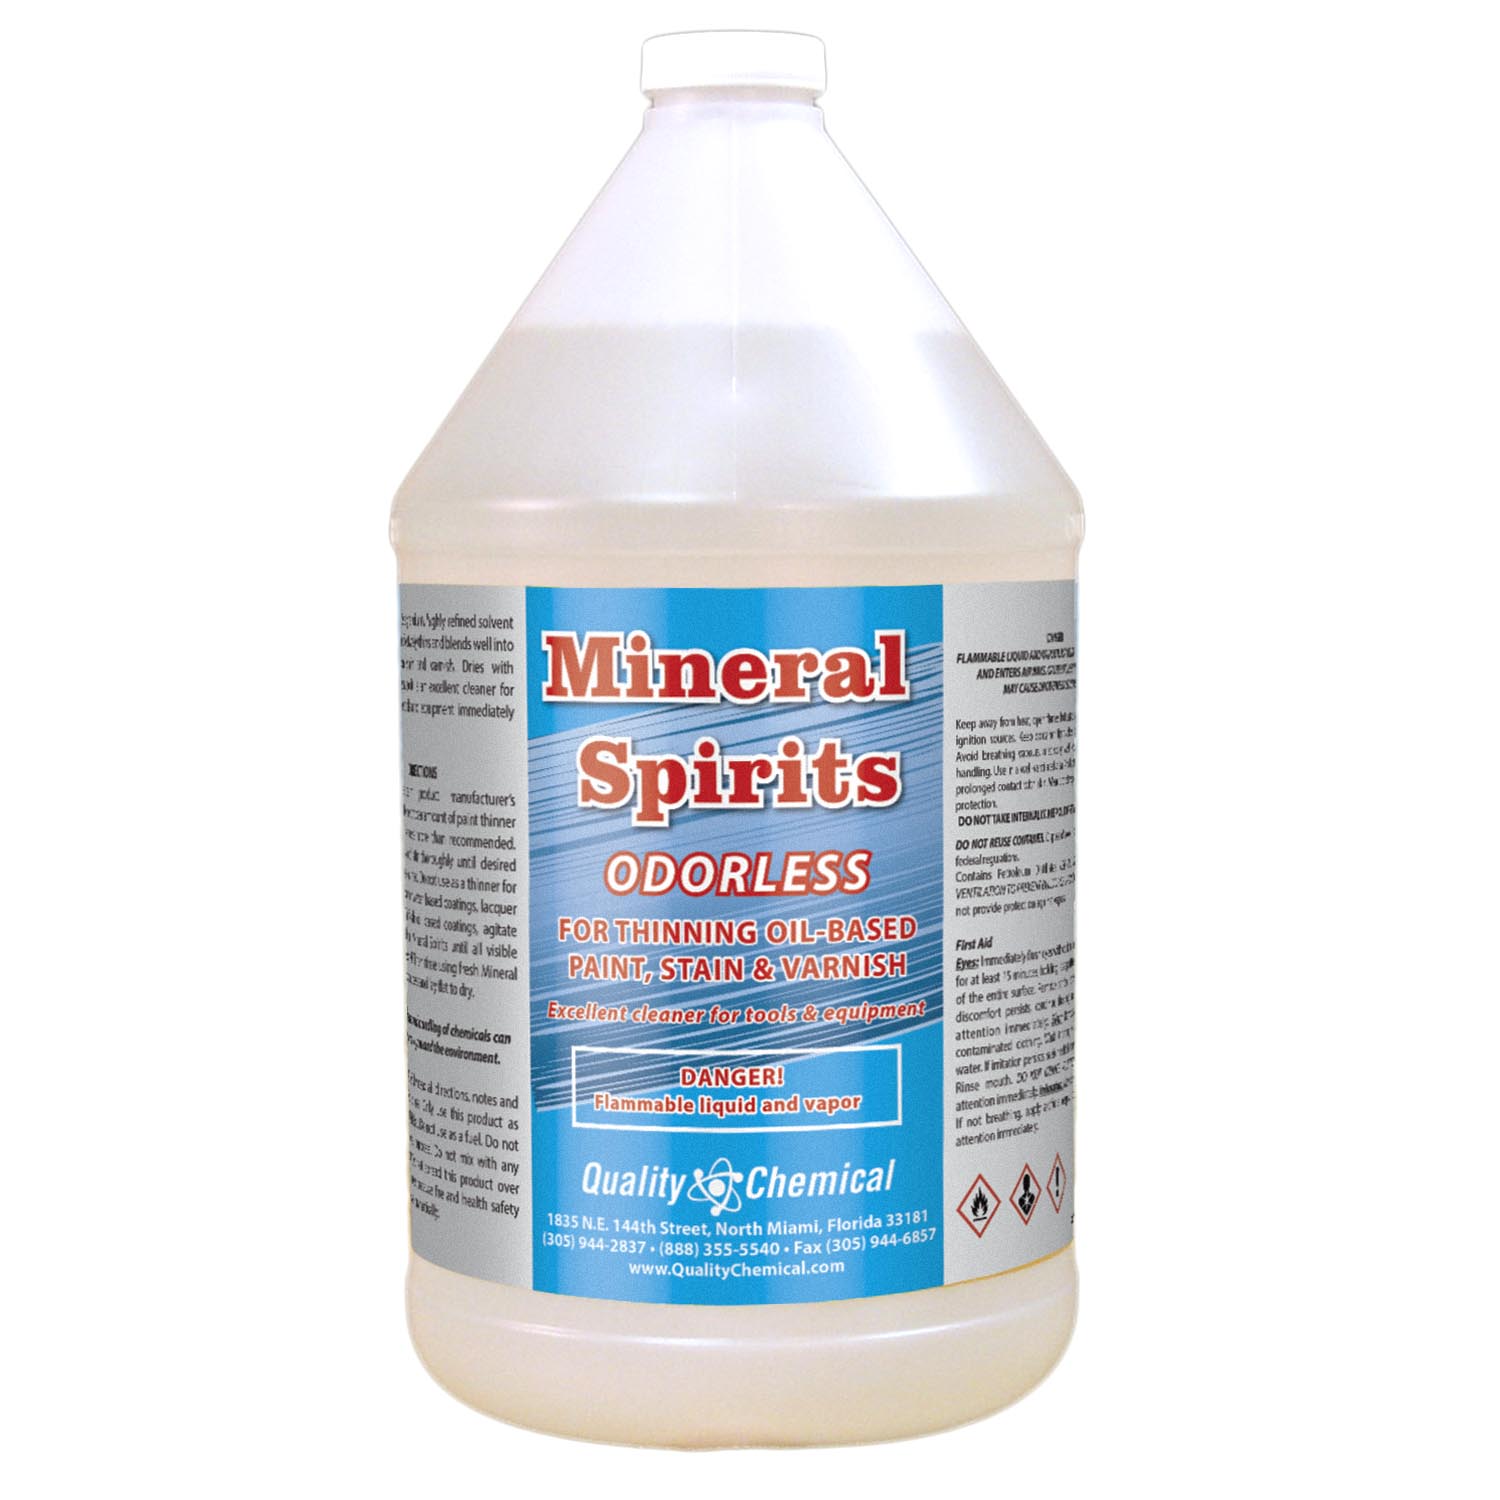 Best Cleaning Supply - Mineral Spirits (Odorless)